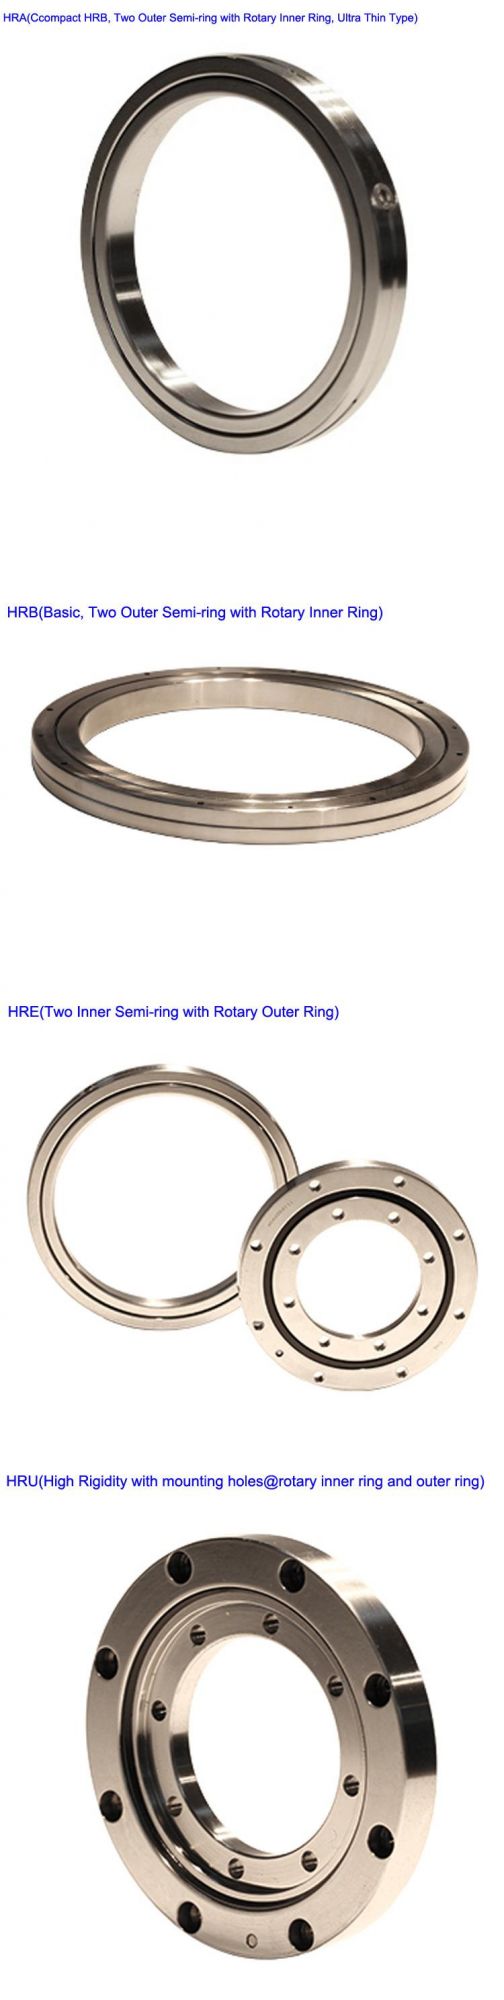 250mm Hre25030 Crossed Cylindrical Roller Bearing with Two Inner Semi Rings